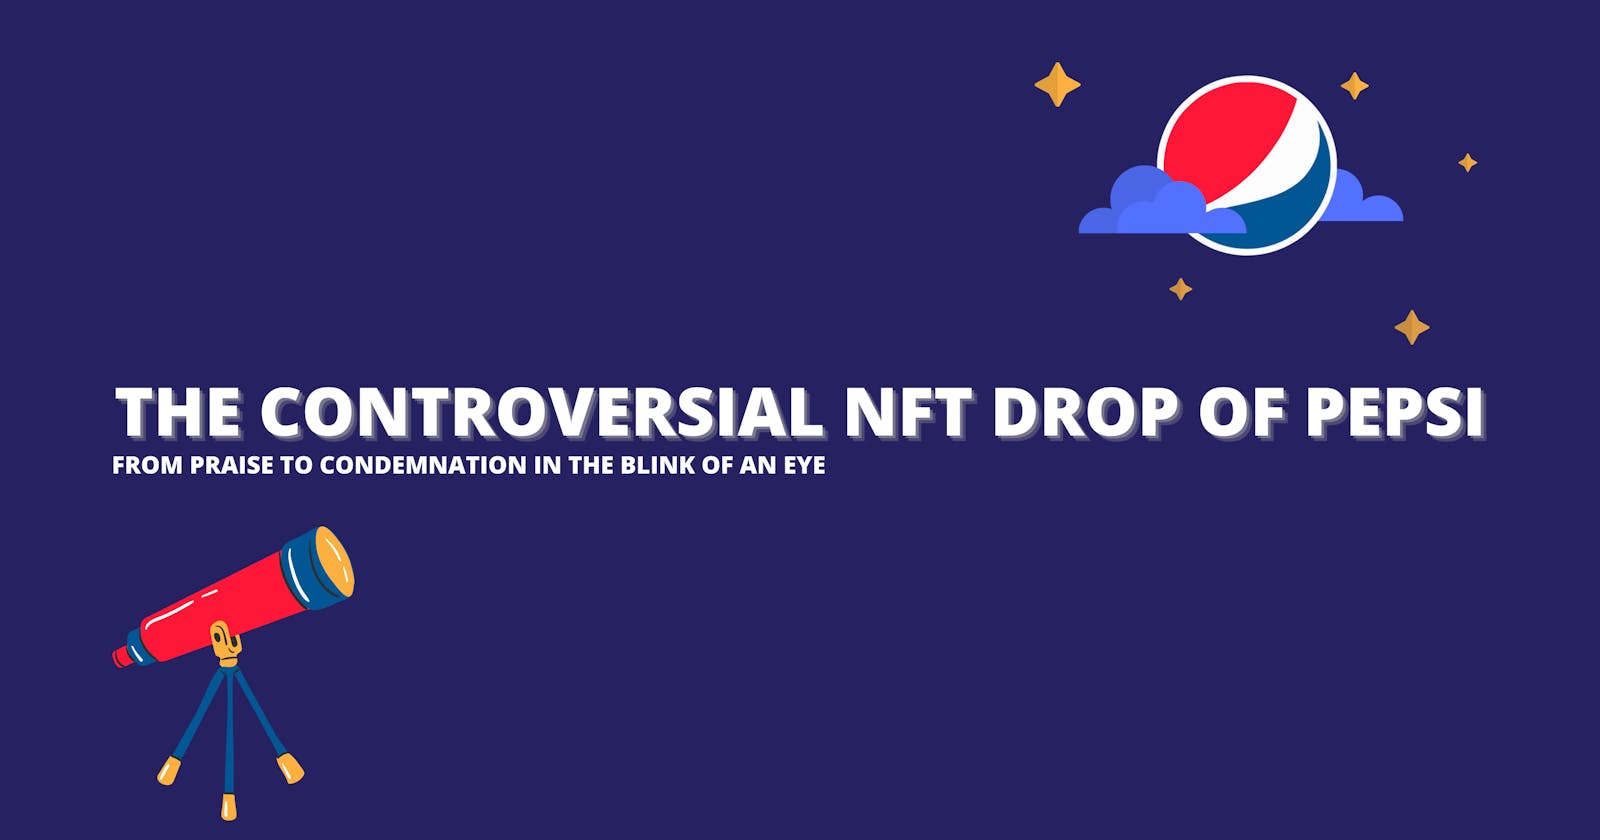 The Controversial NFT Drop of Pepsi